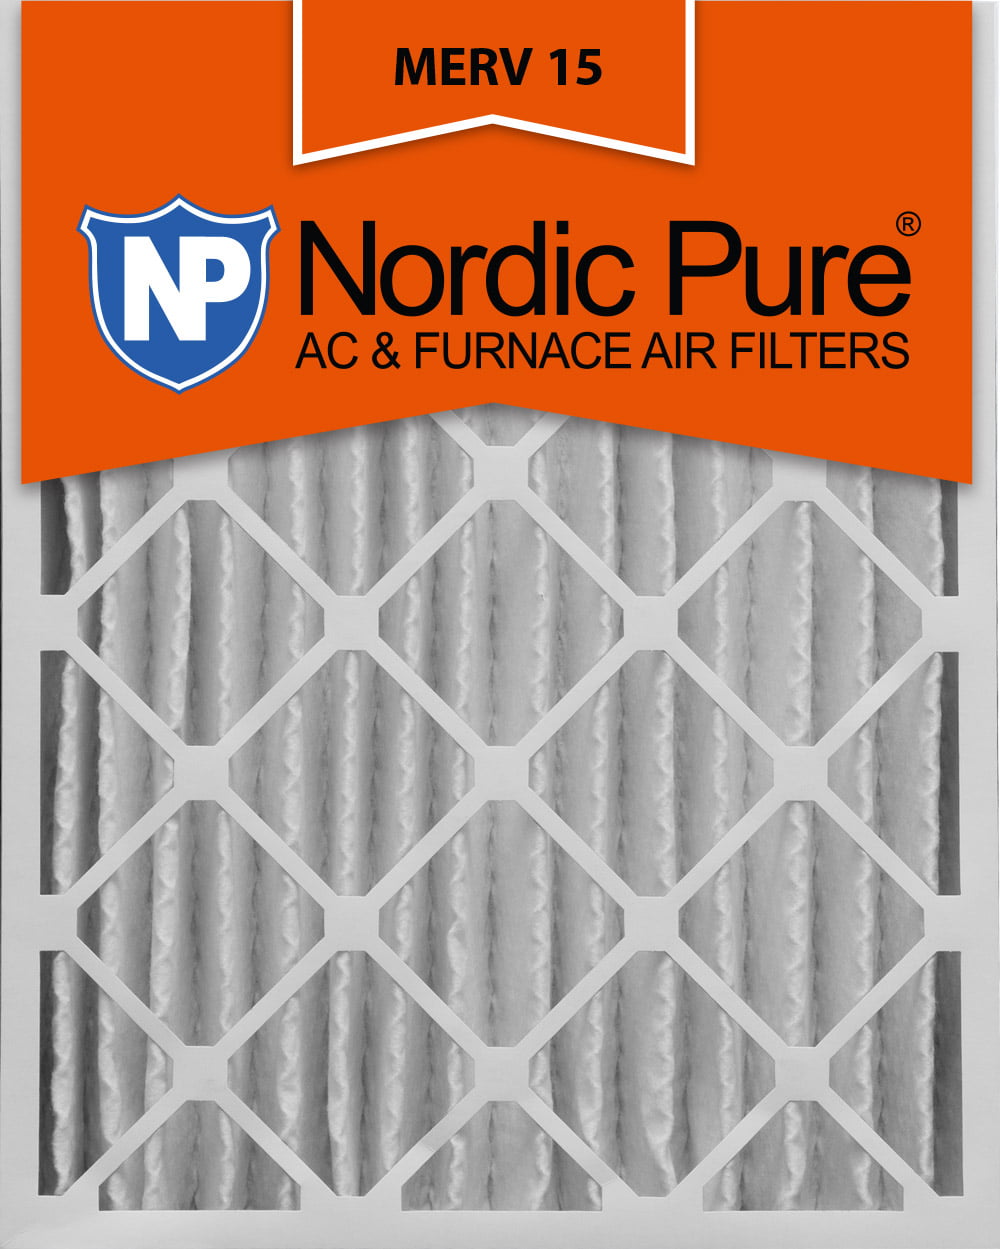 MERV 14 Pleated AC Furnace Air Filters 1 Pack 3-5/8 Actual Depth Nordic Pure 16x20x4 